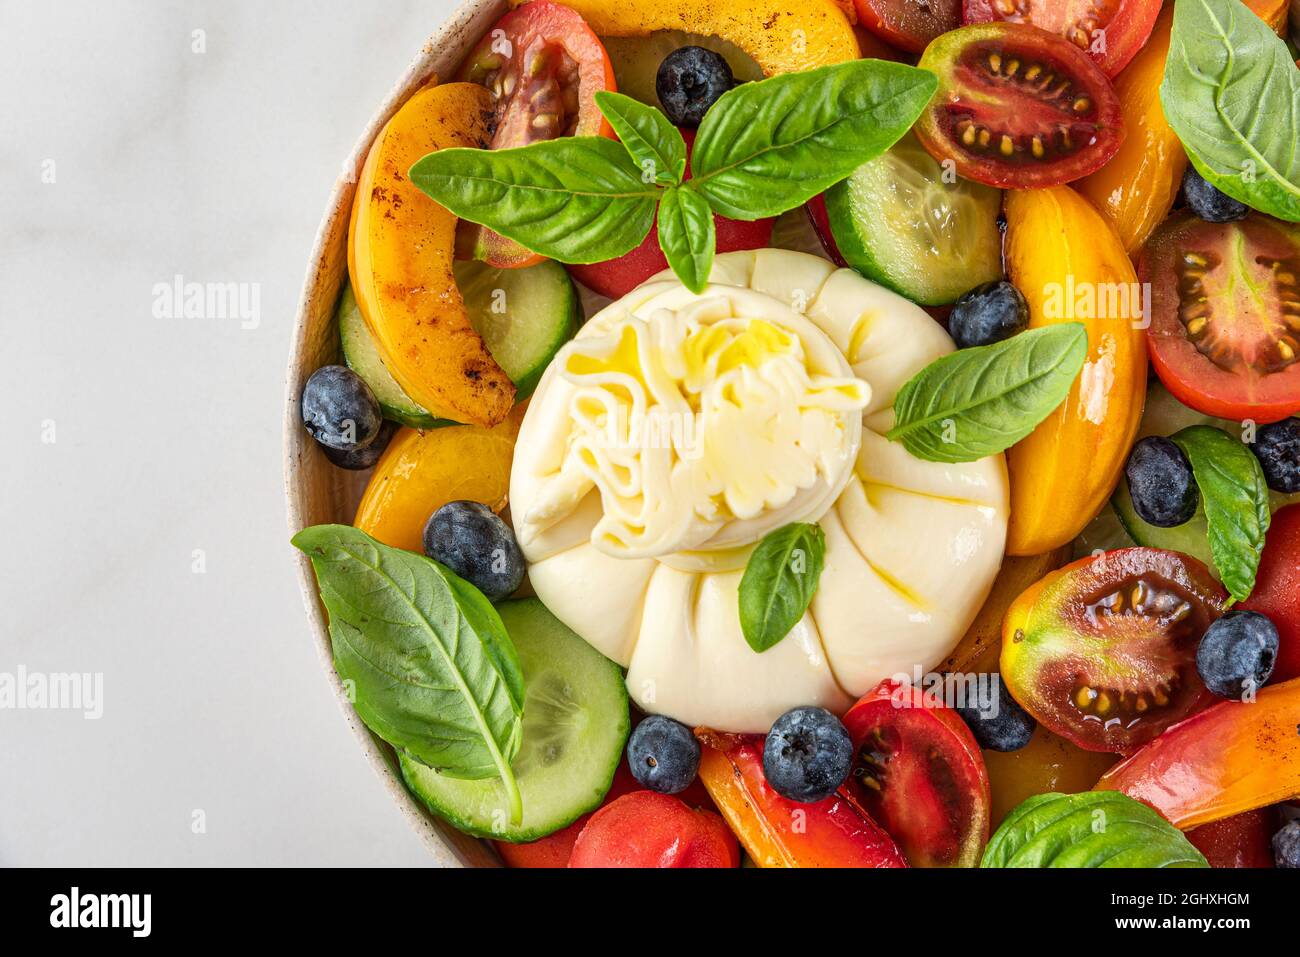 Fresh salad with grilled peaches, burrata cheese, blueberries and vegetables on a plate on white background. Top view. Healthy diet summer food concep Stock Photo